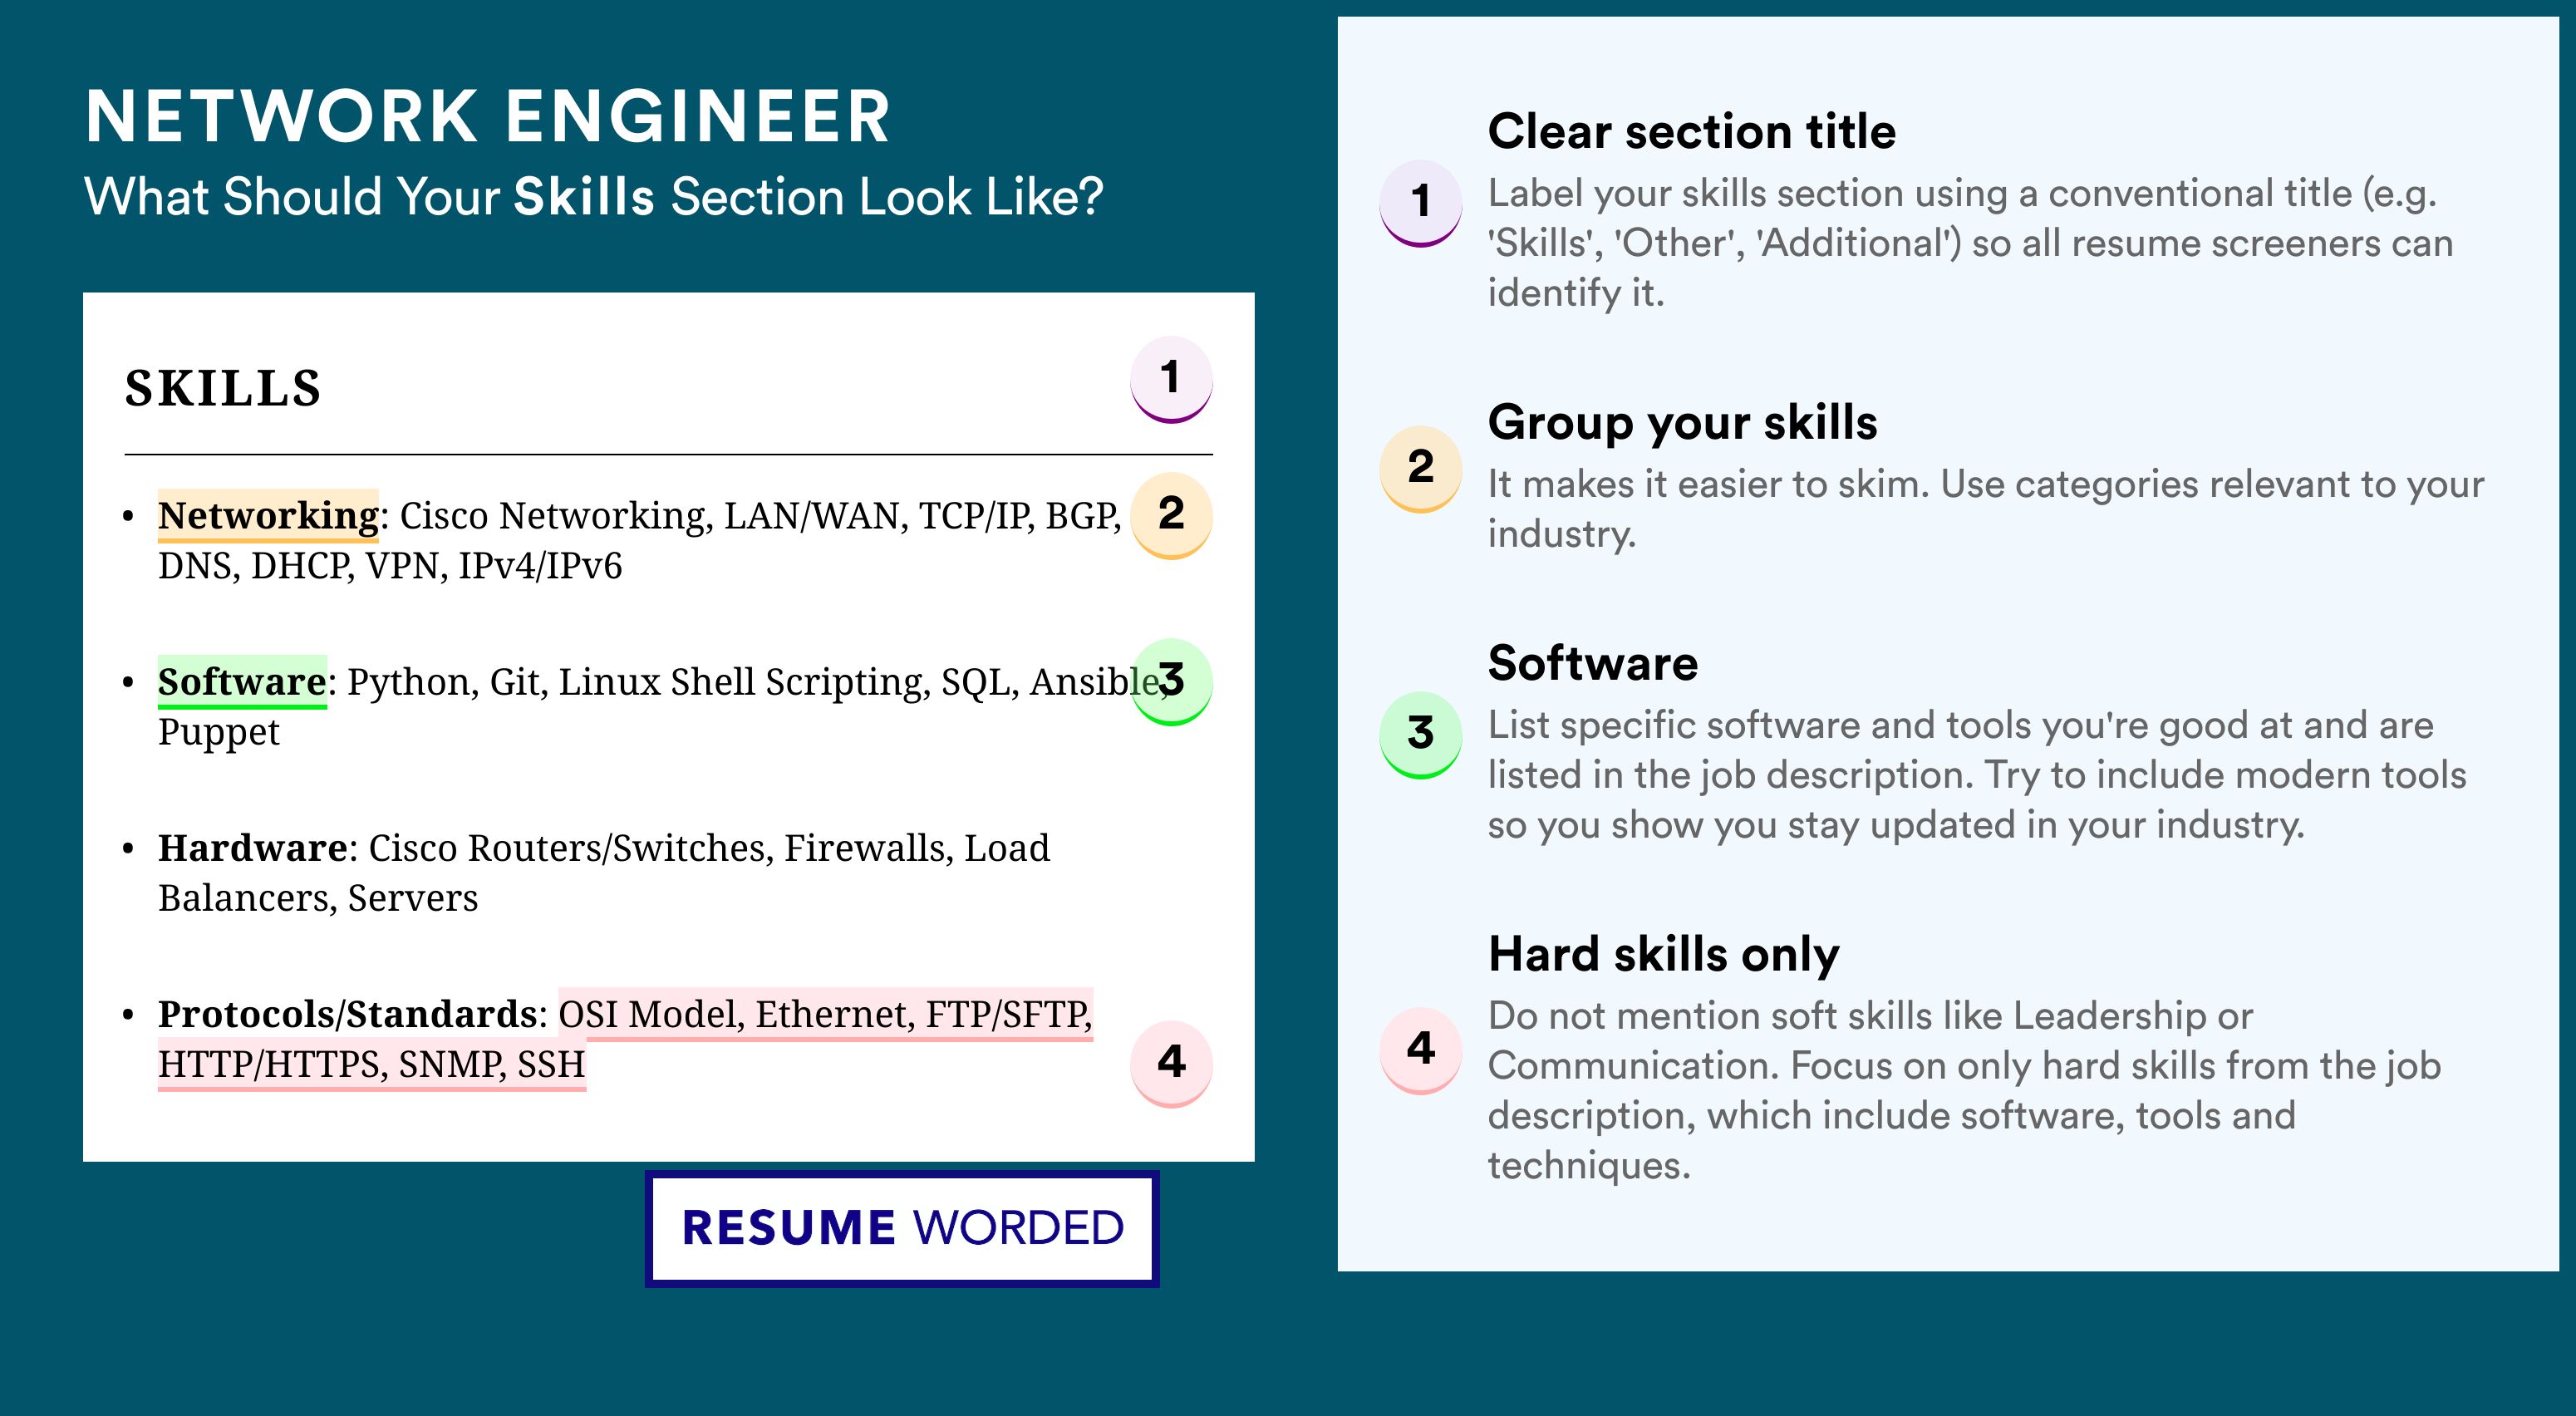 How To Write Your Skills Section - Network Engineer Roles